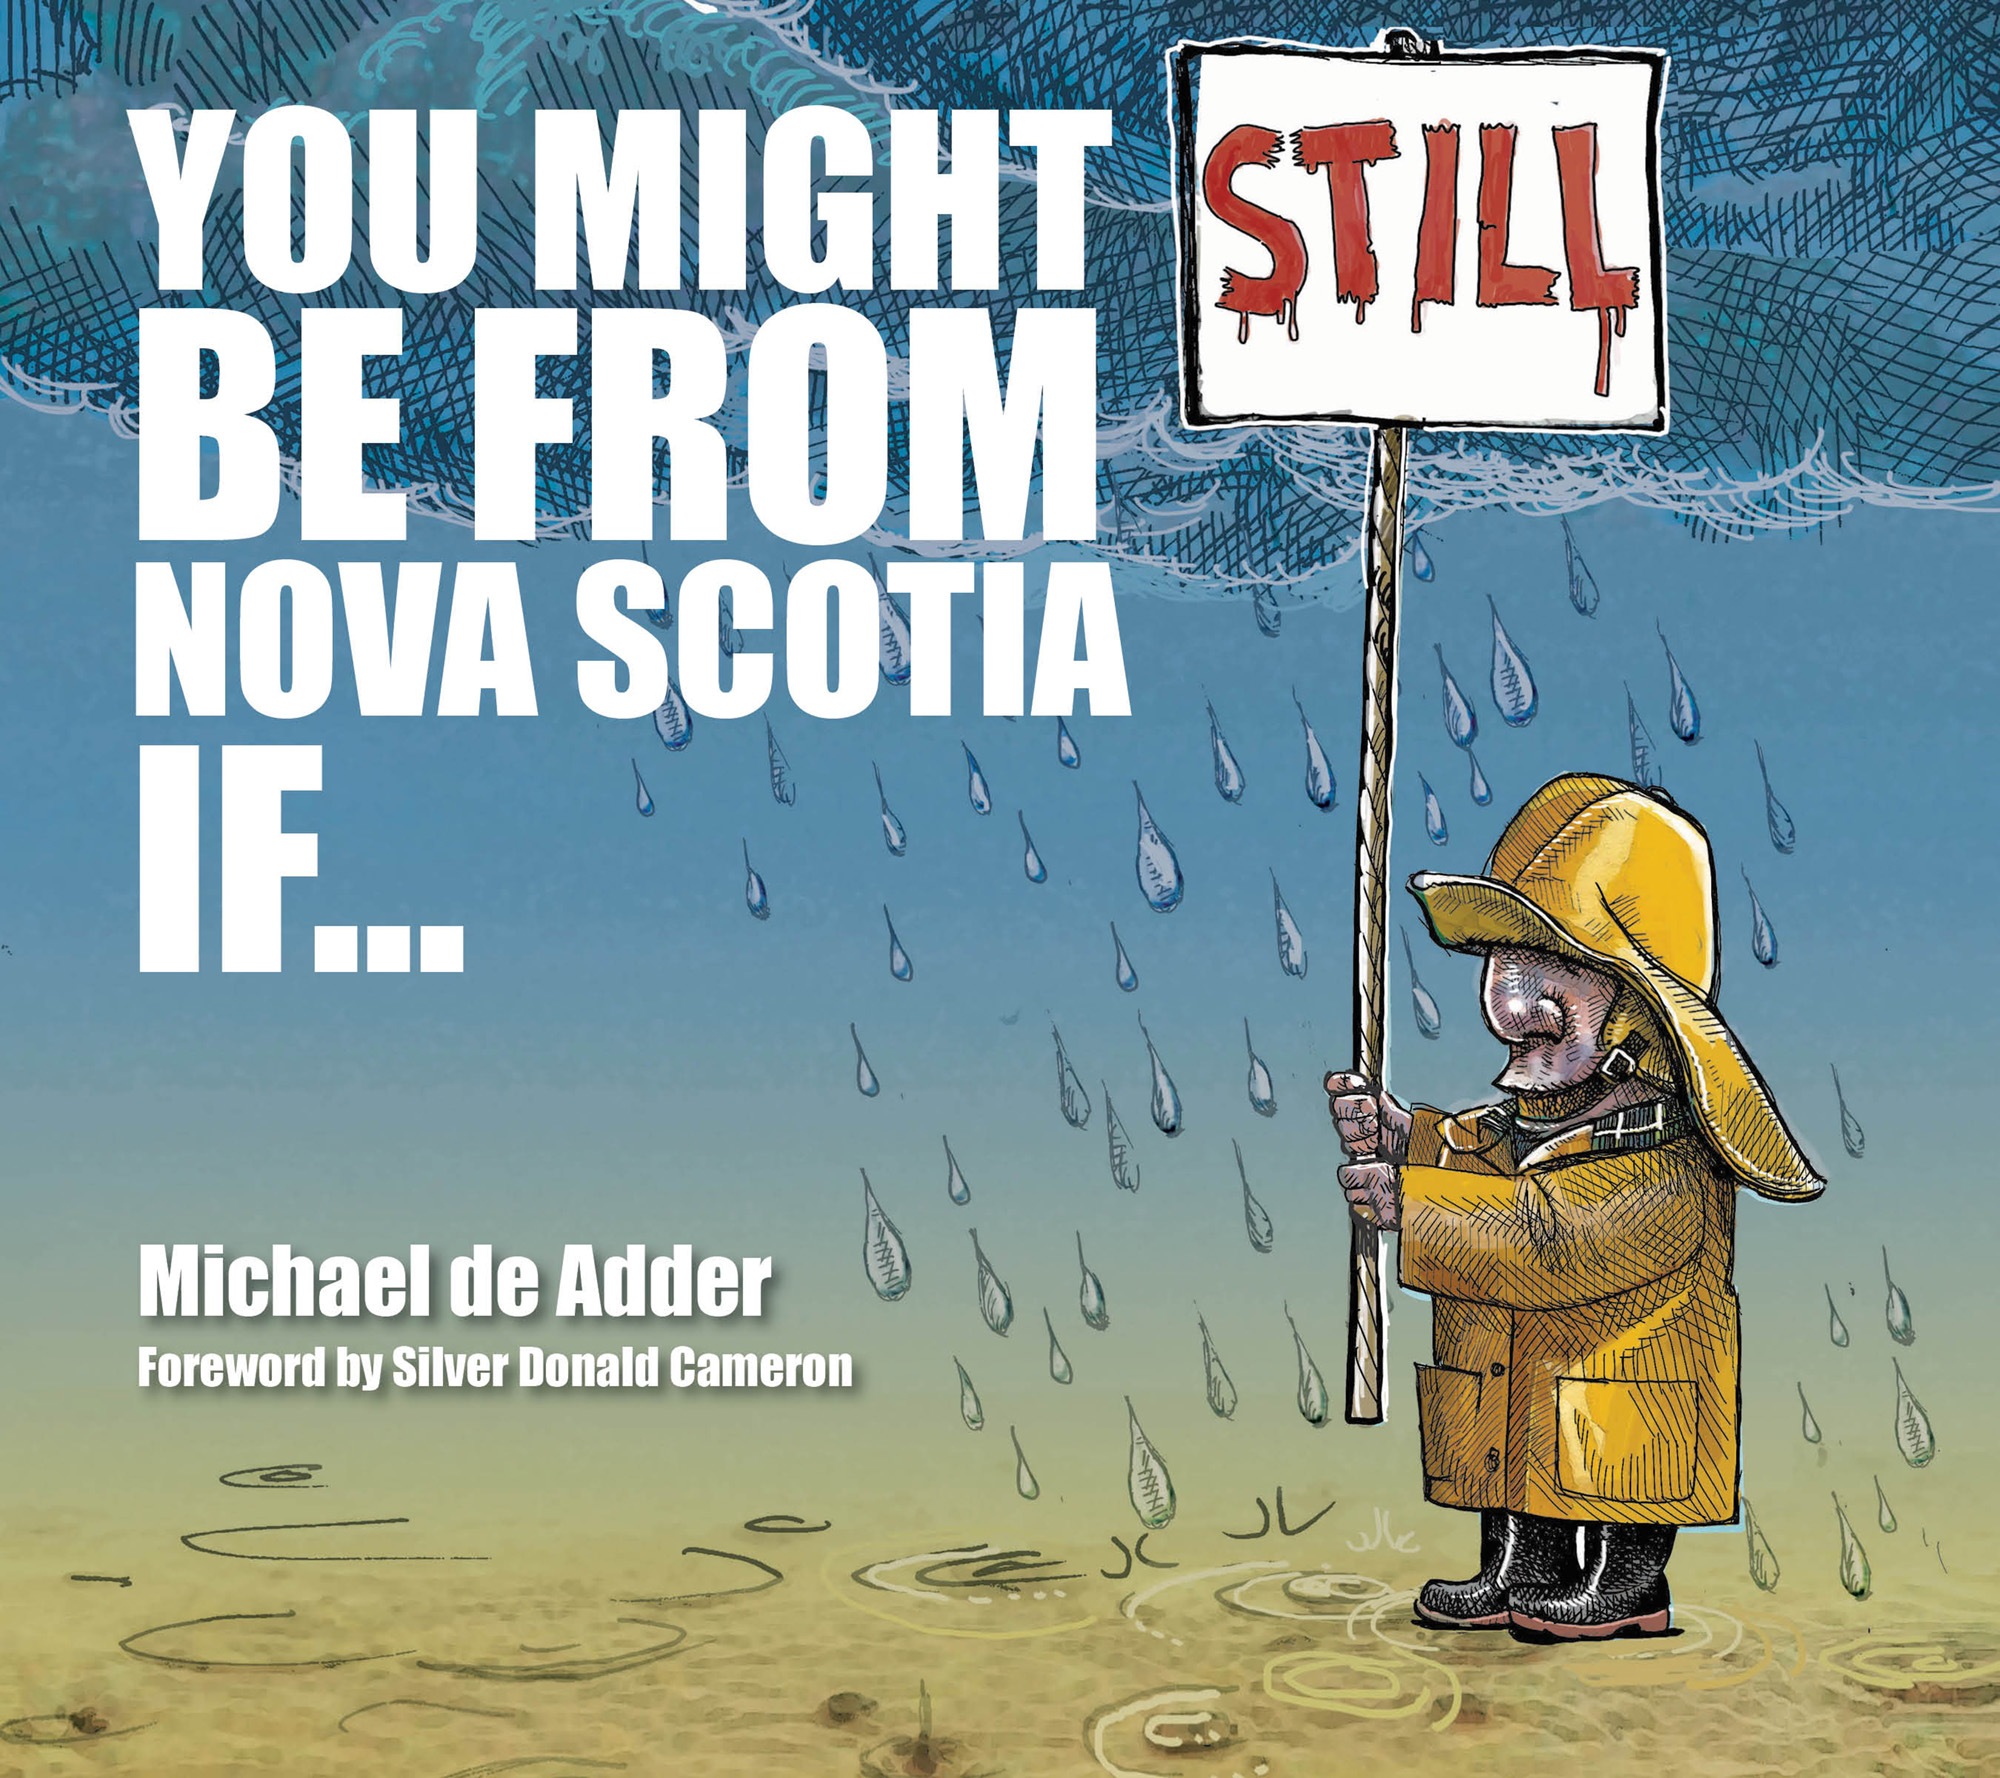 You Might Still Be From Nova Scotia If…